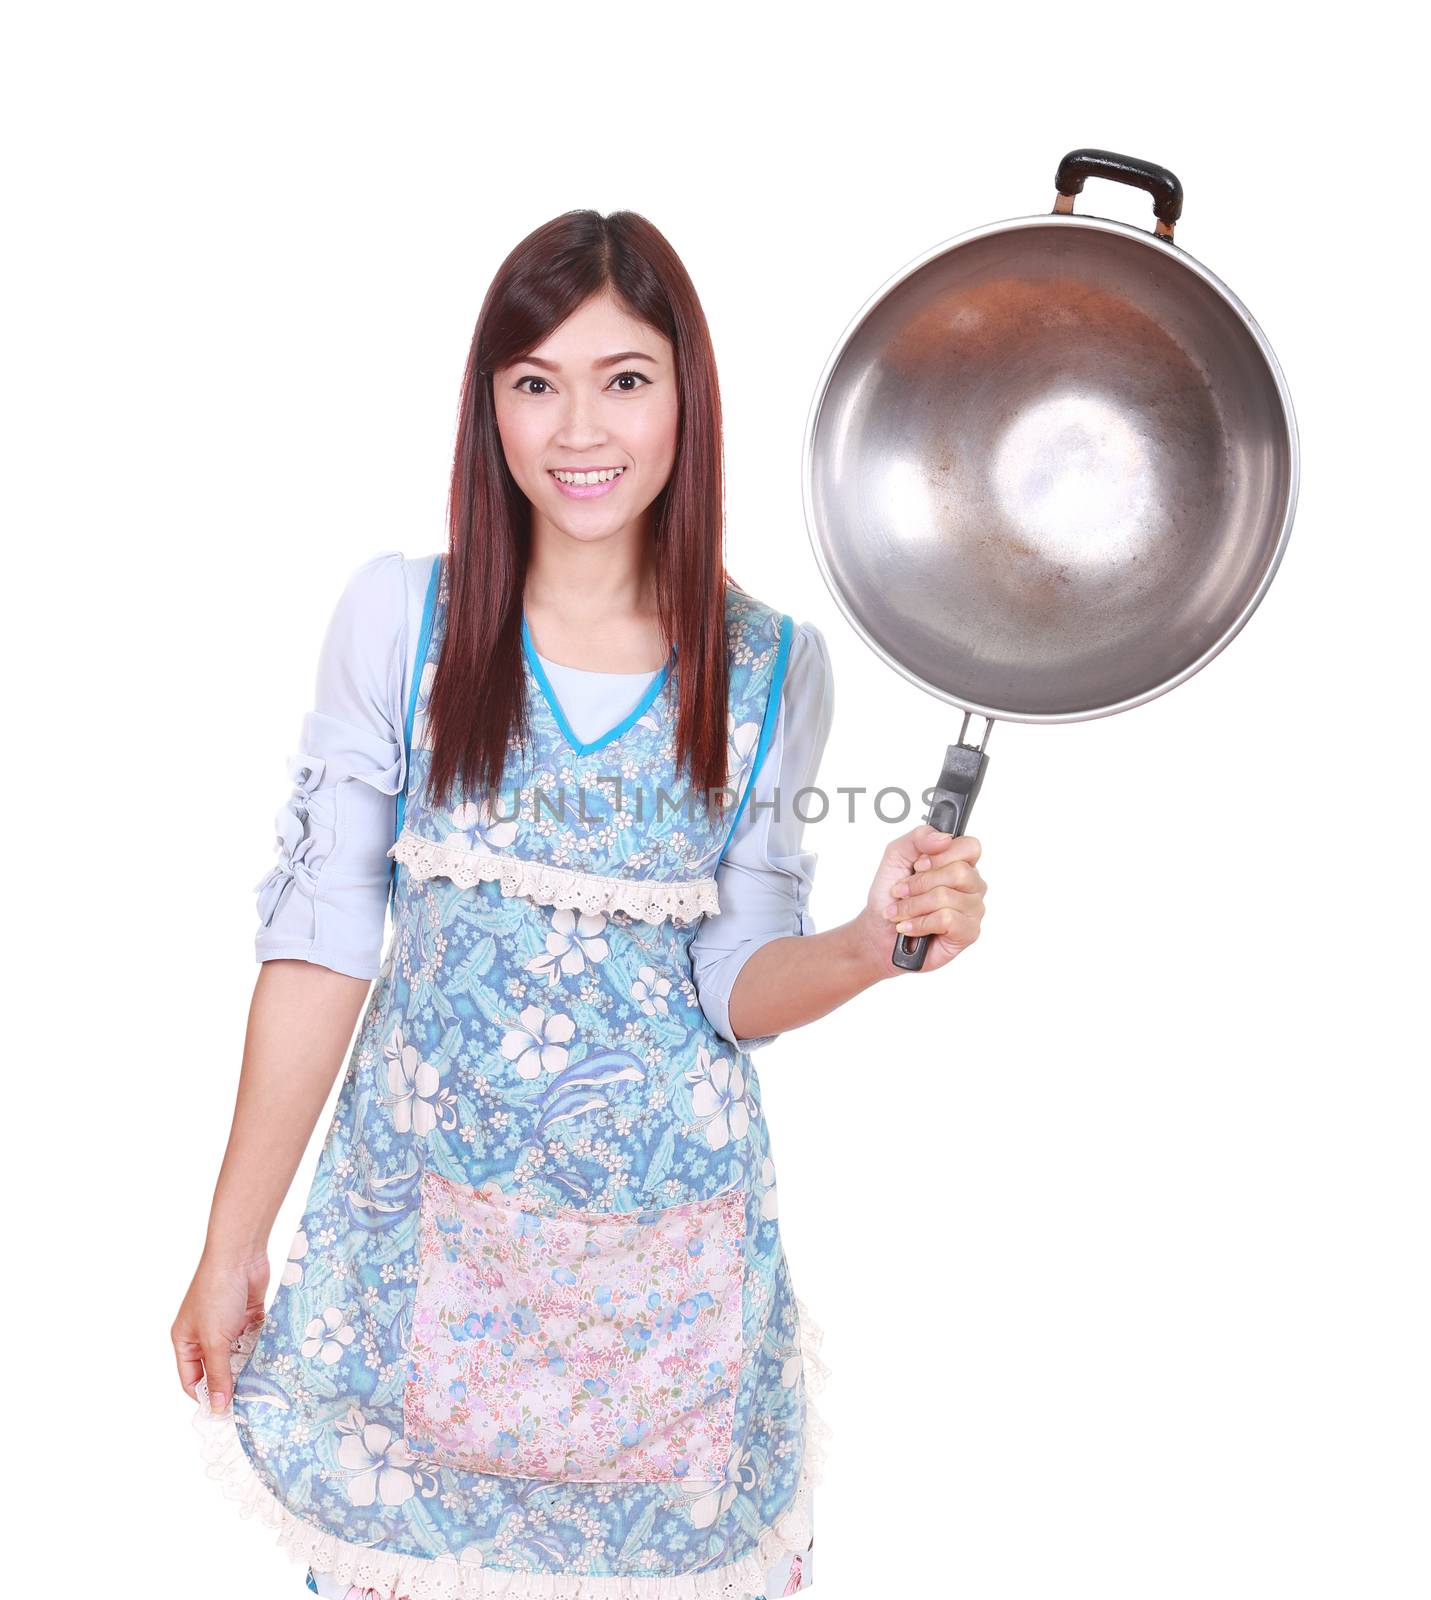 female chef holding the frying pan isolated on white by geargodz